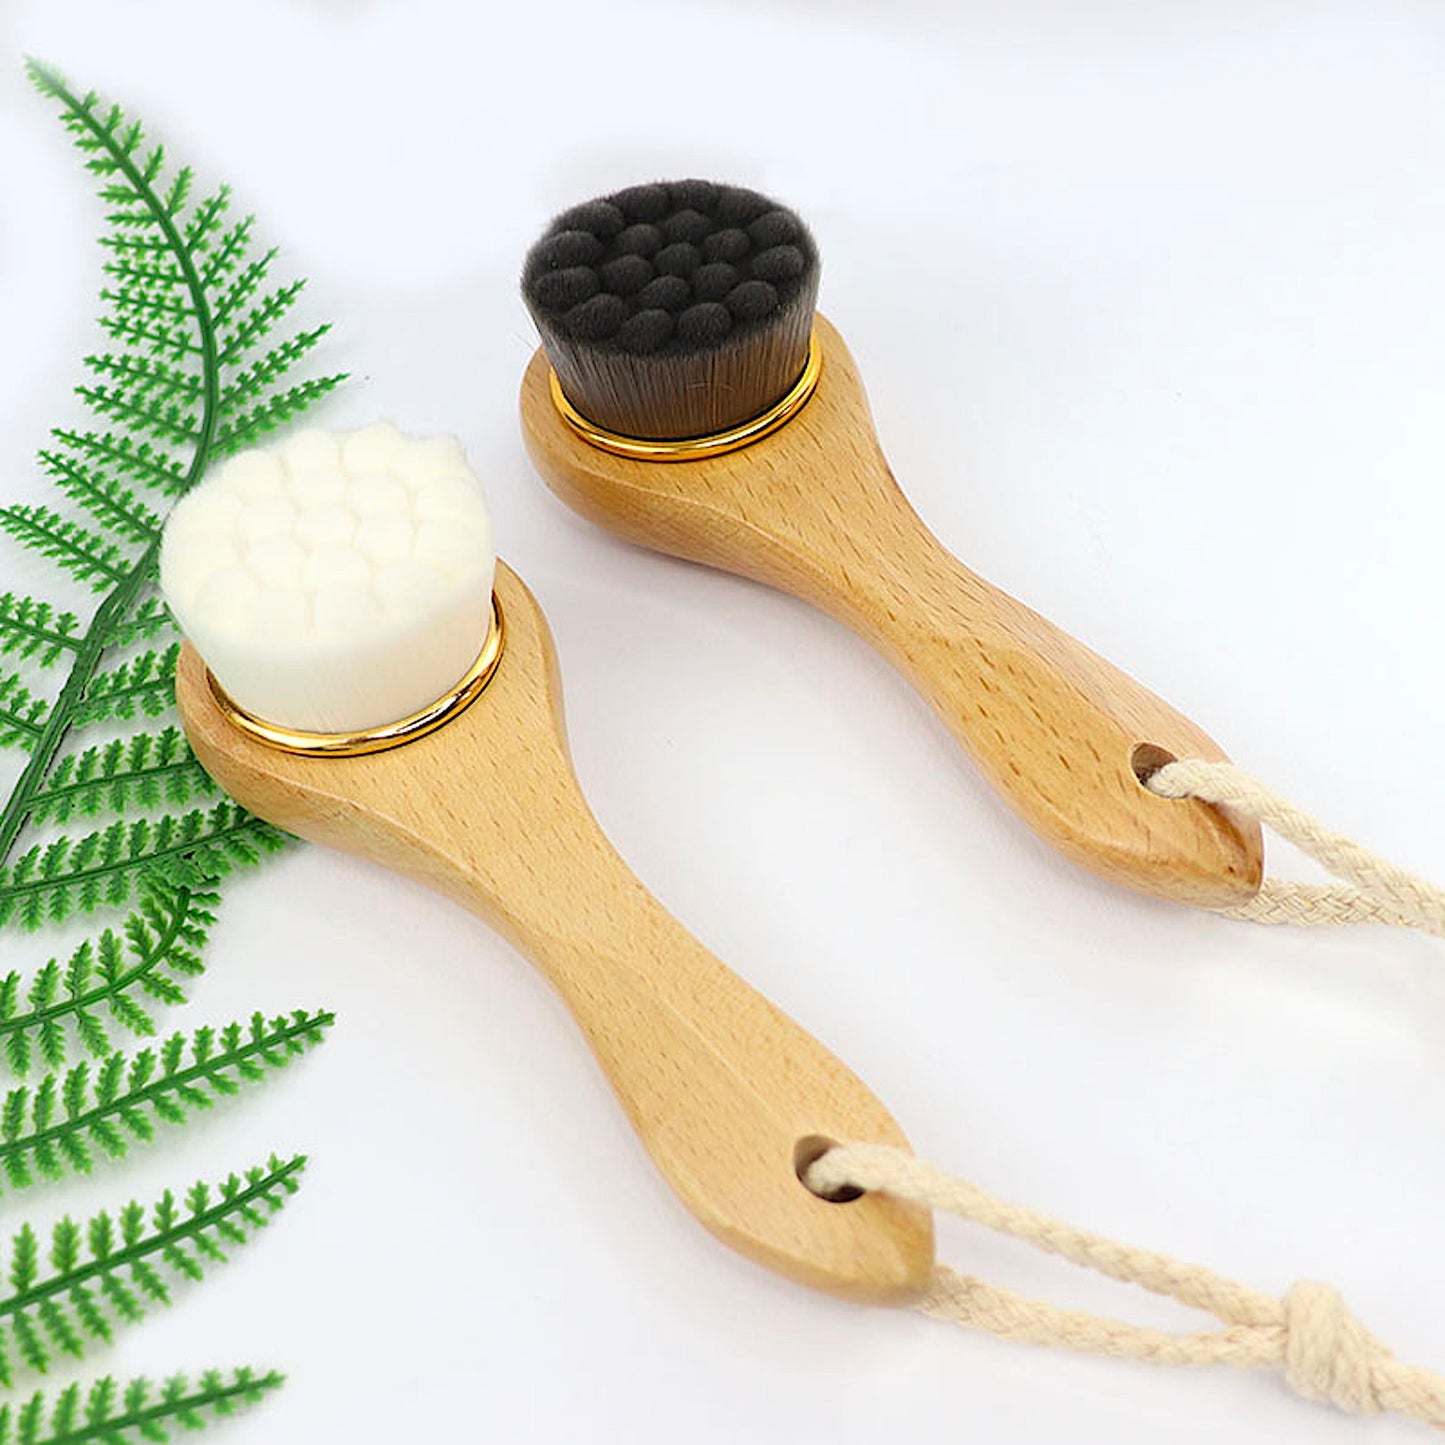 Facial Exfoliating Eco Friendly Bamboo Handle Cleansing Brush Ultra Soft Bristles Natural Bamboo Soft Touch Skin in 100% Cotton Travel Pouch  19.99 Indigo Paisley